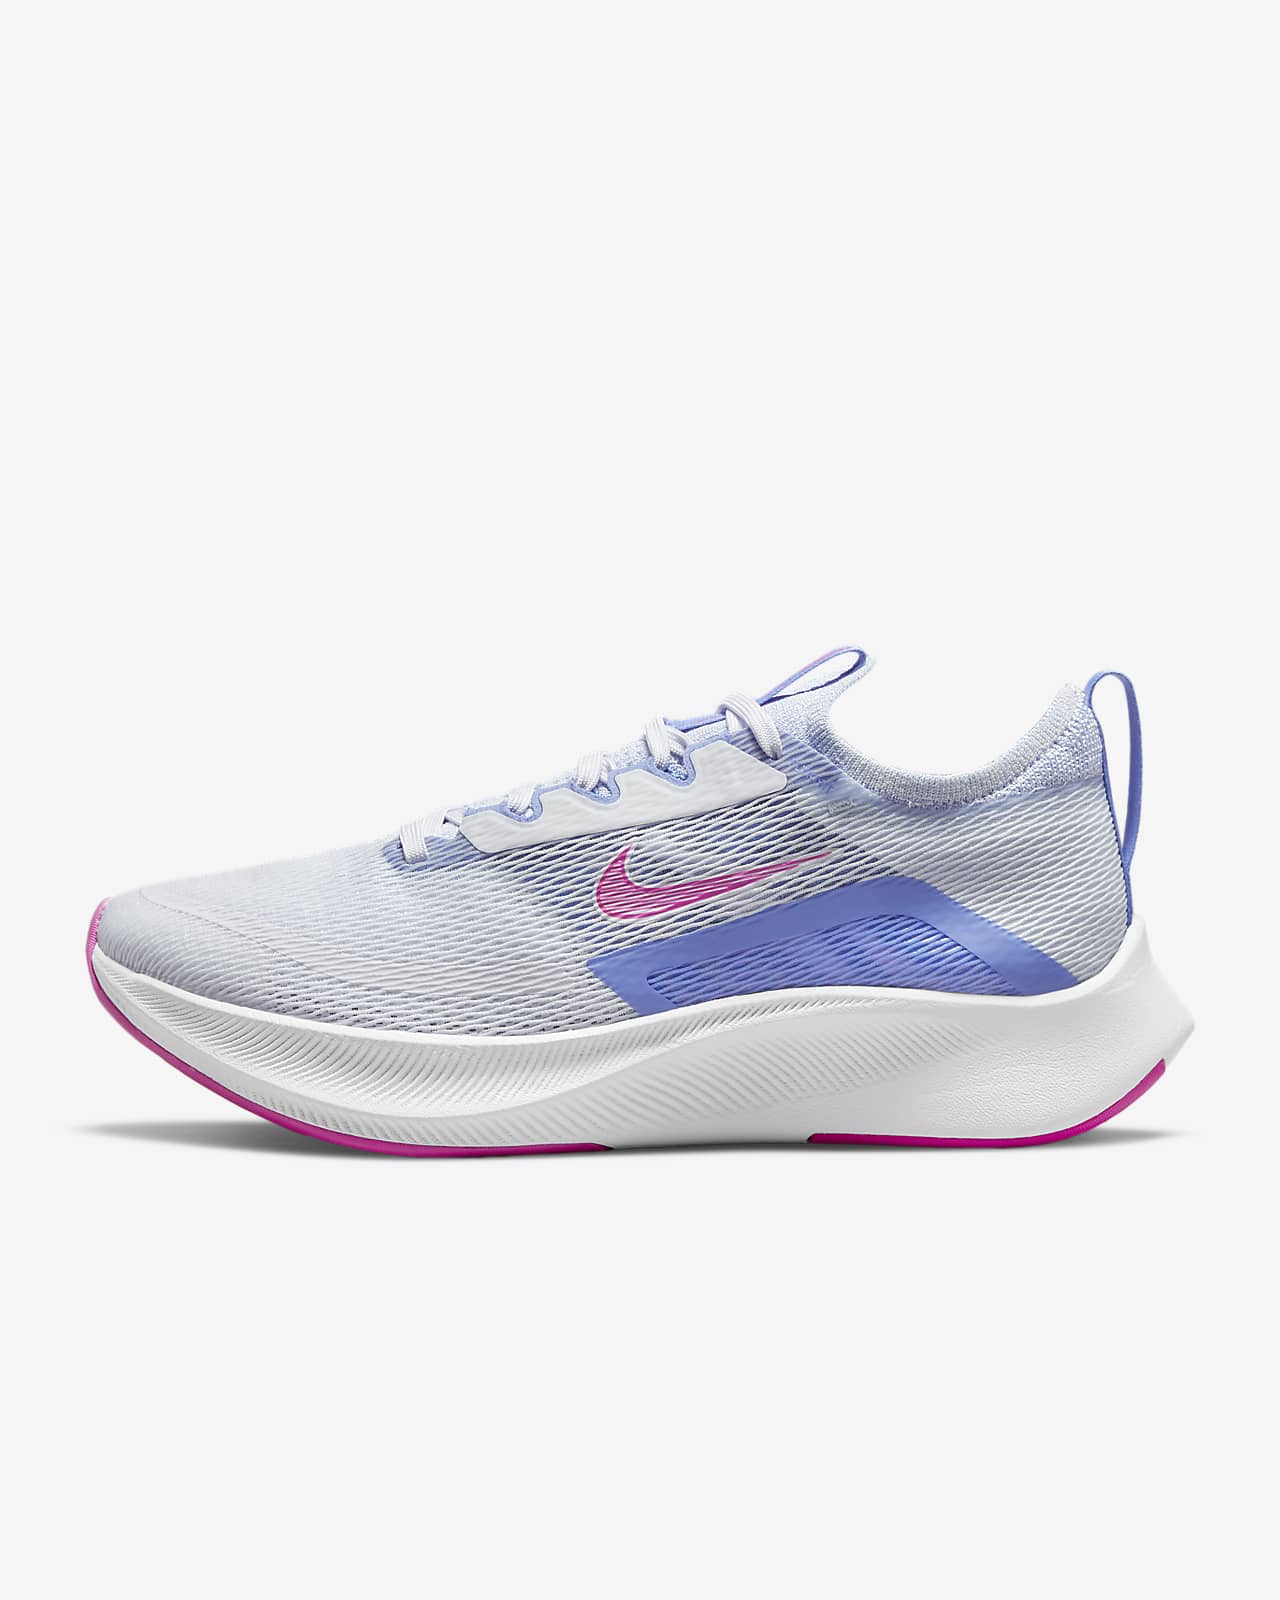 Nike Zoom Fly 4 Women's Road Running Shoes